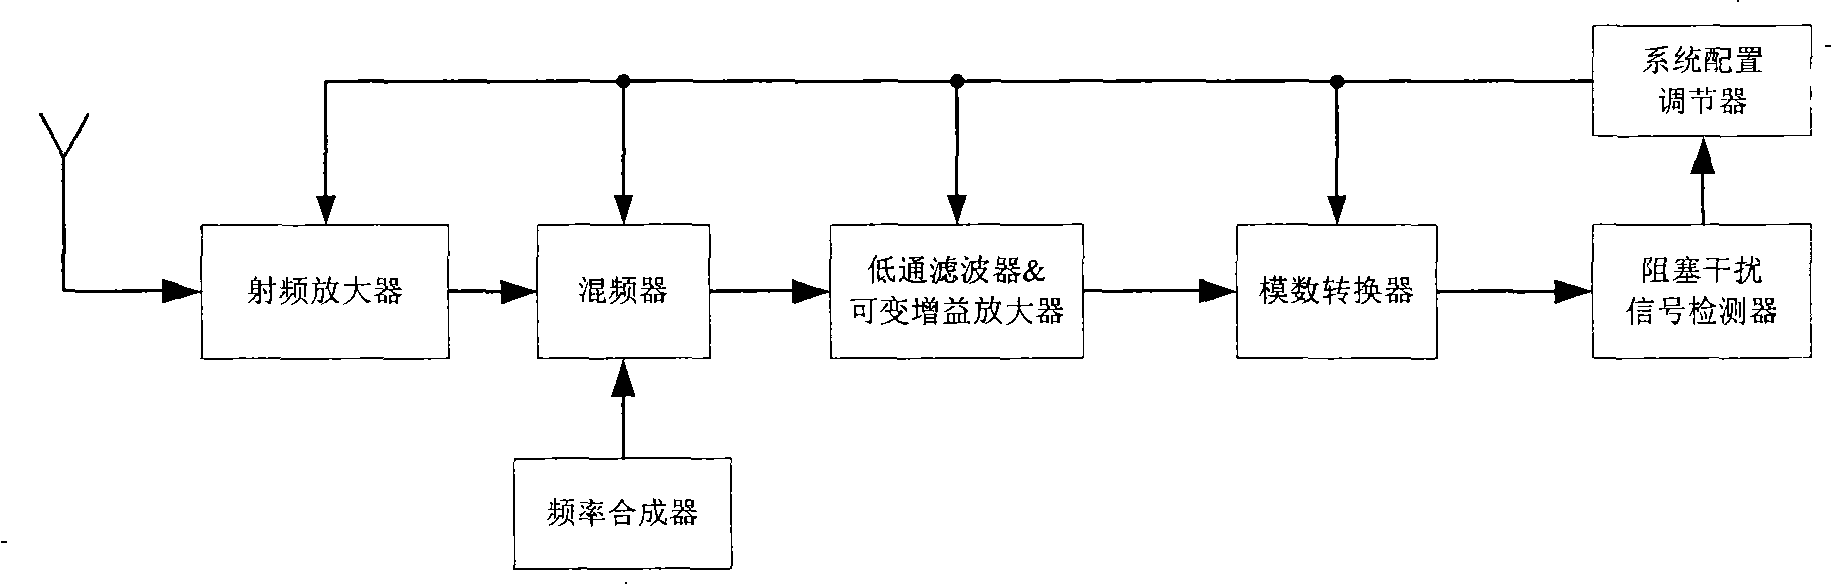 Low-power consumption receiver capable of dynamically detecting barrage jamming signal